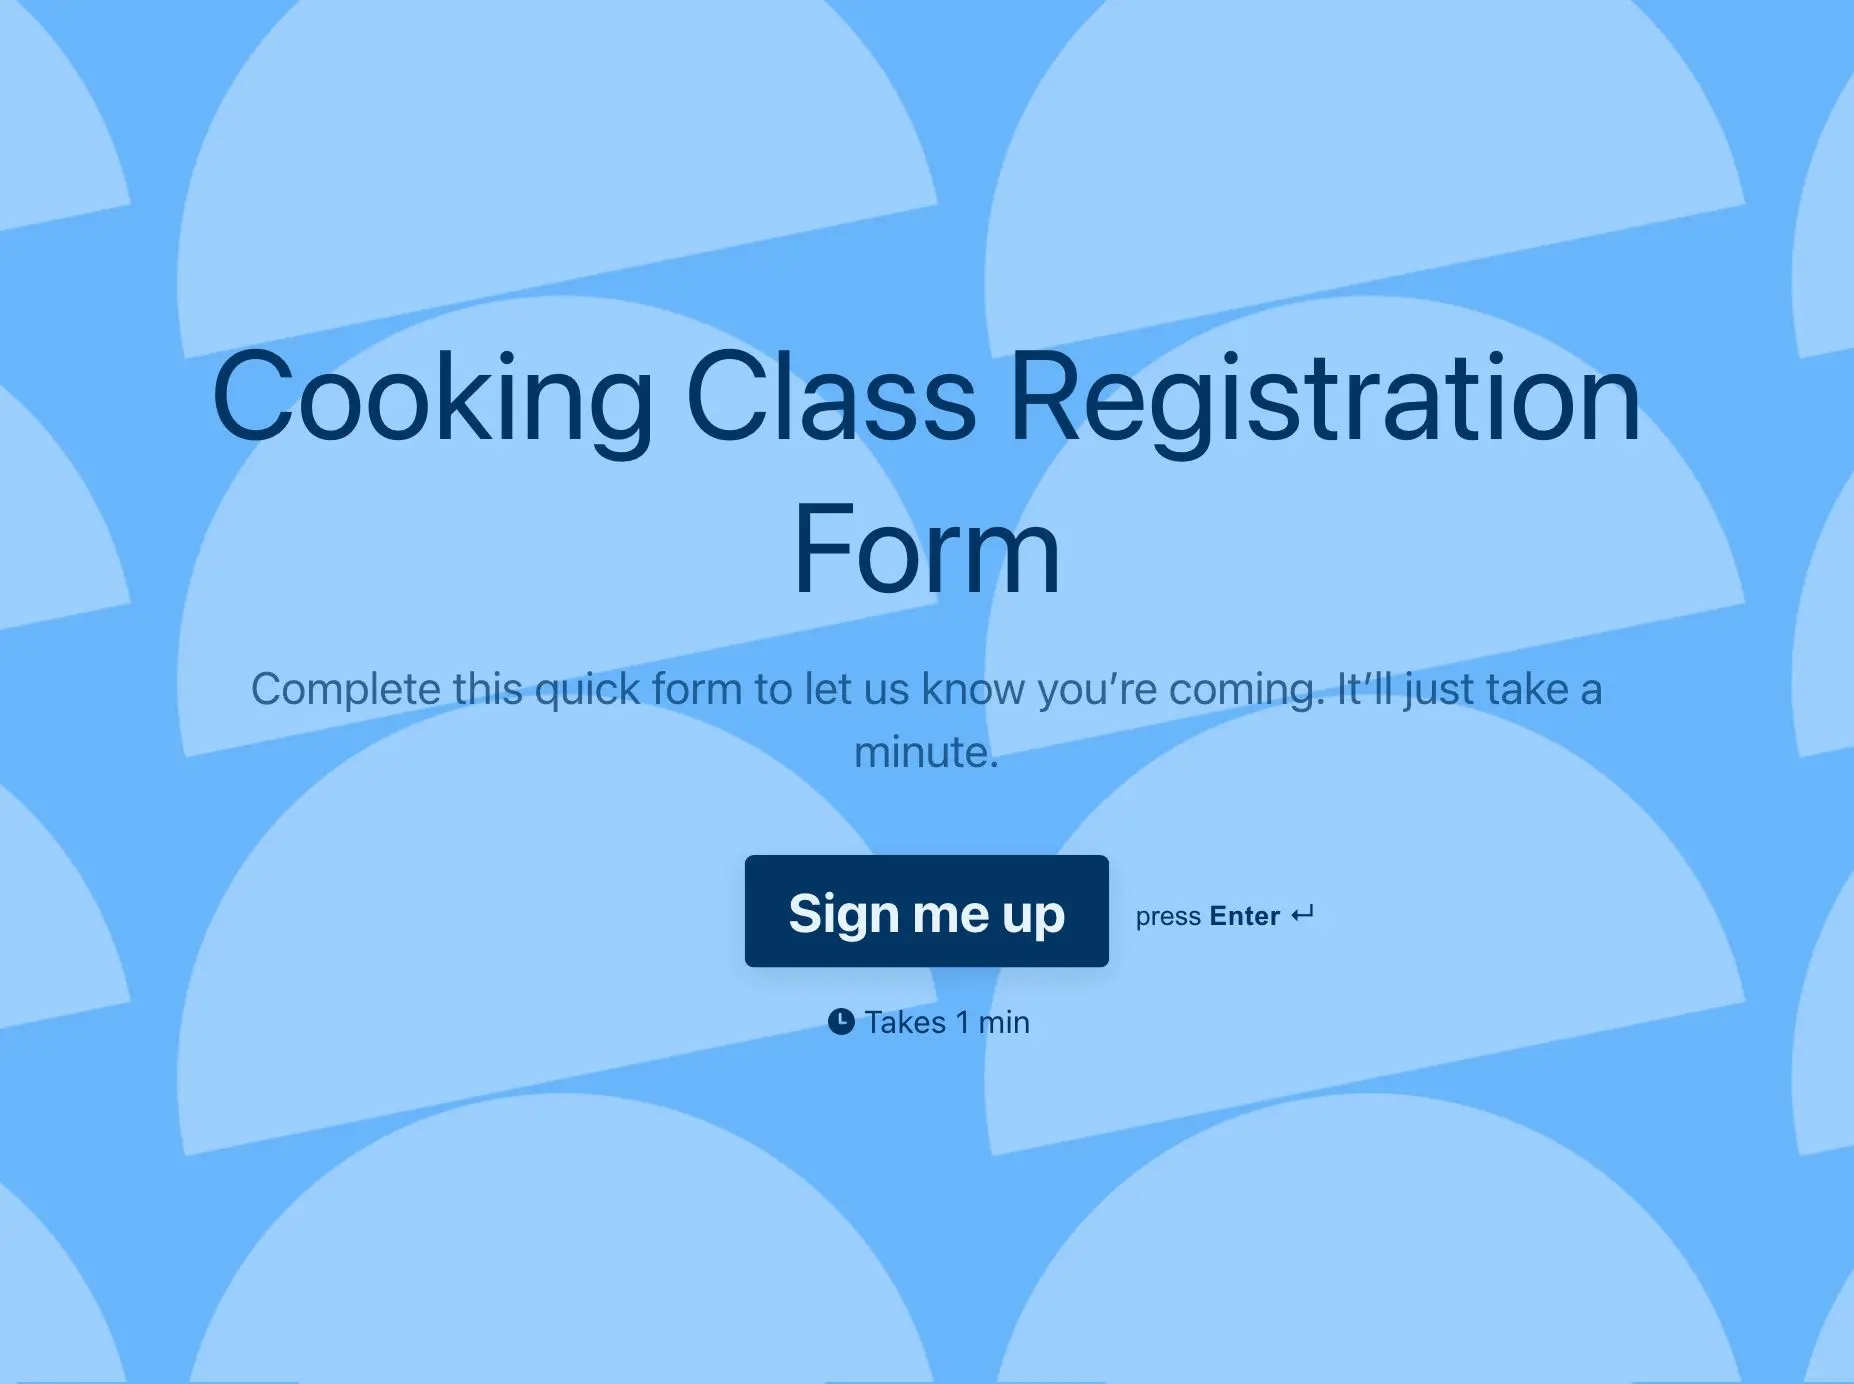 Cooking Class Registration Form Template Hero